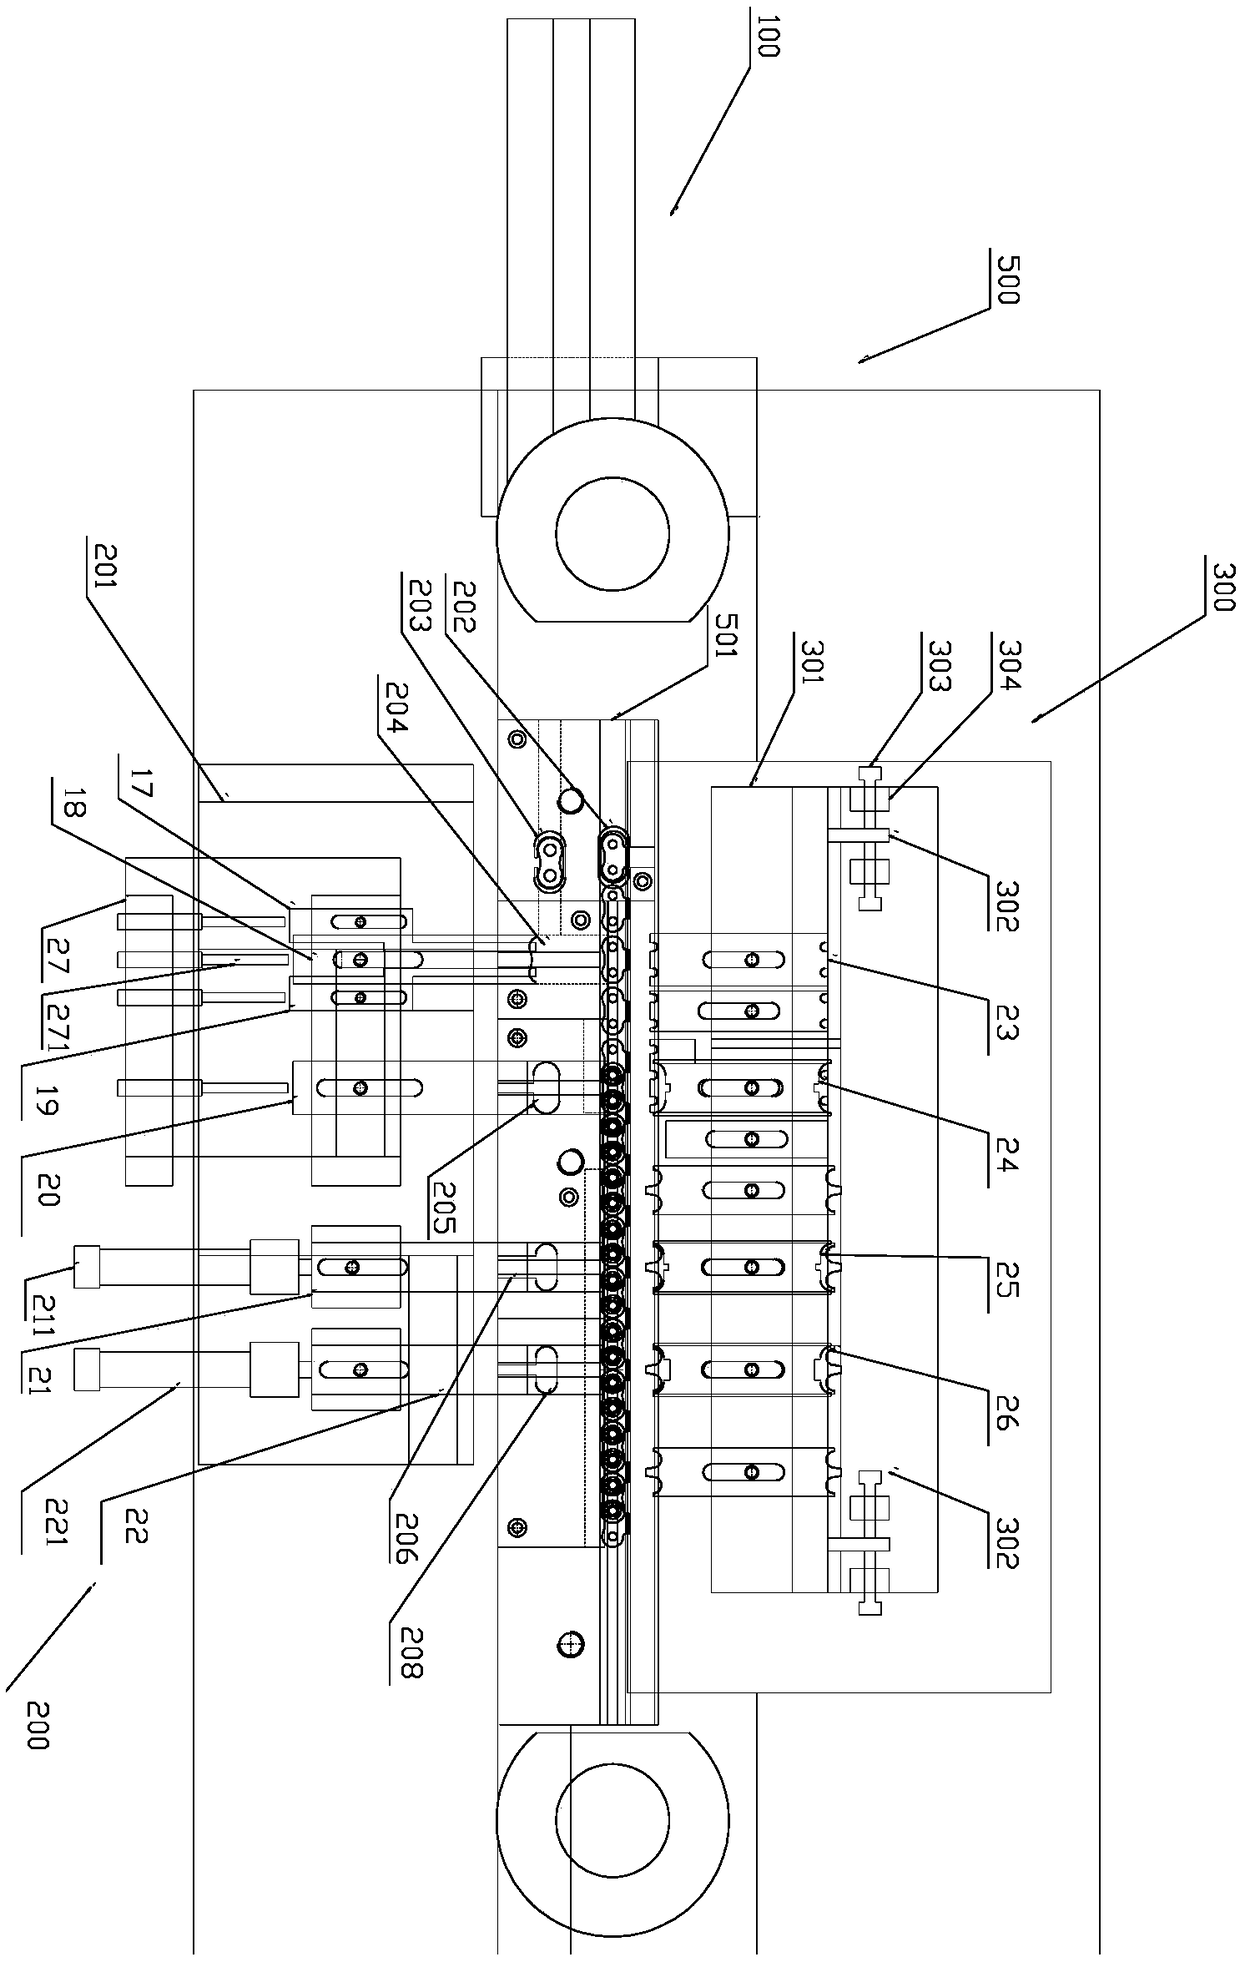 Push plate coordination location chain assembly device